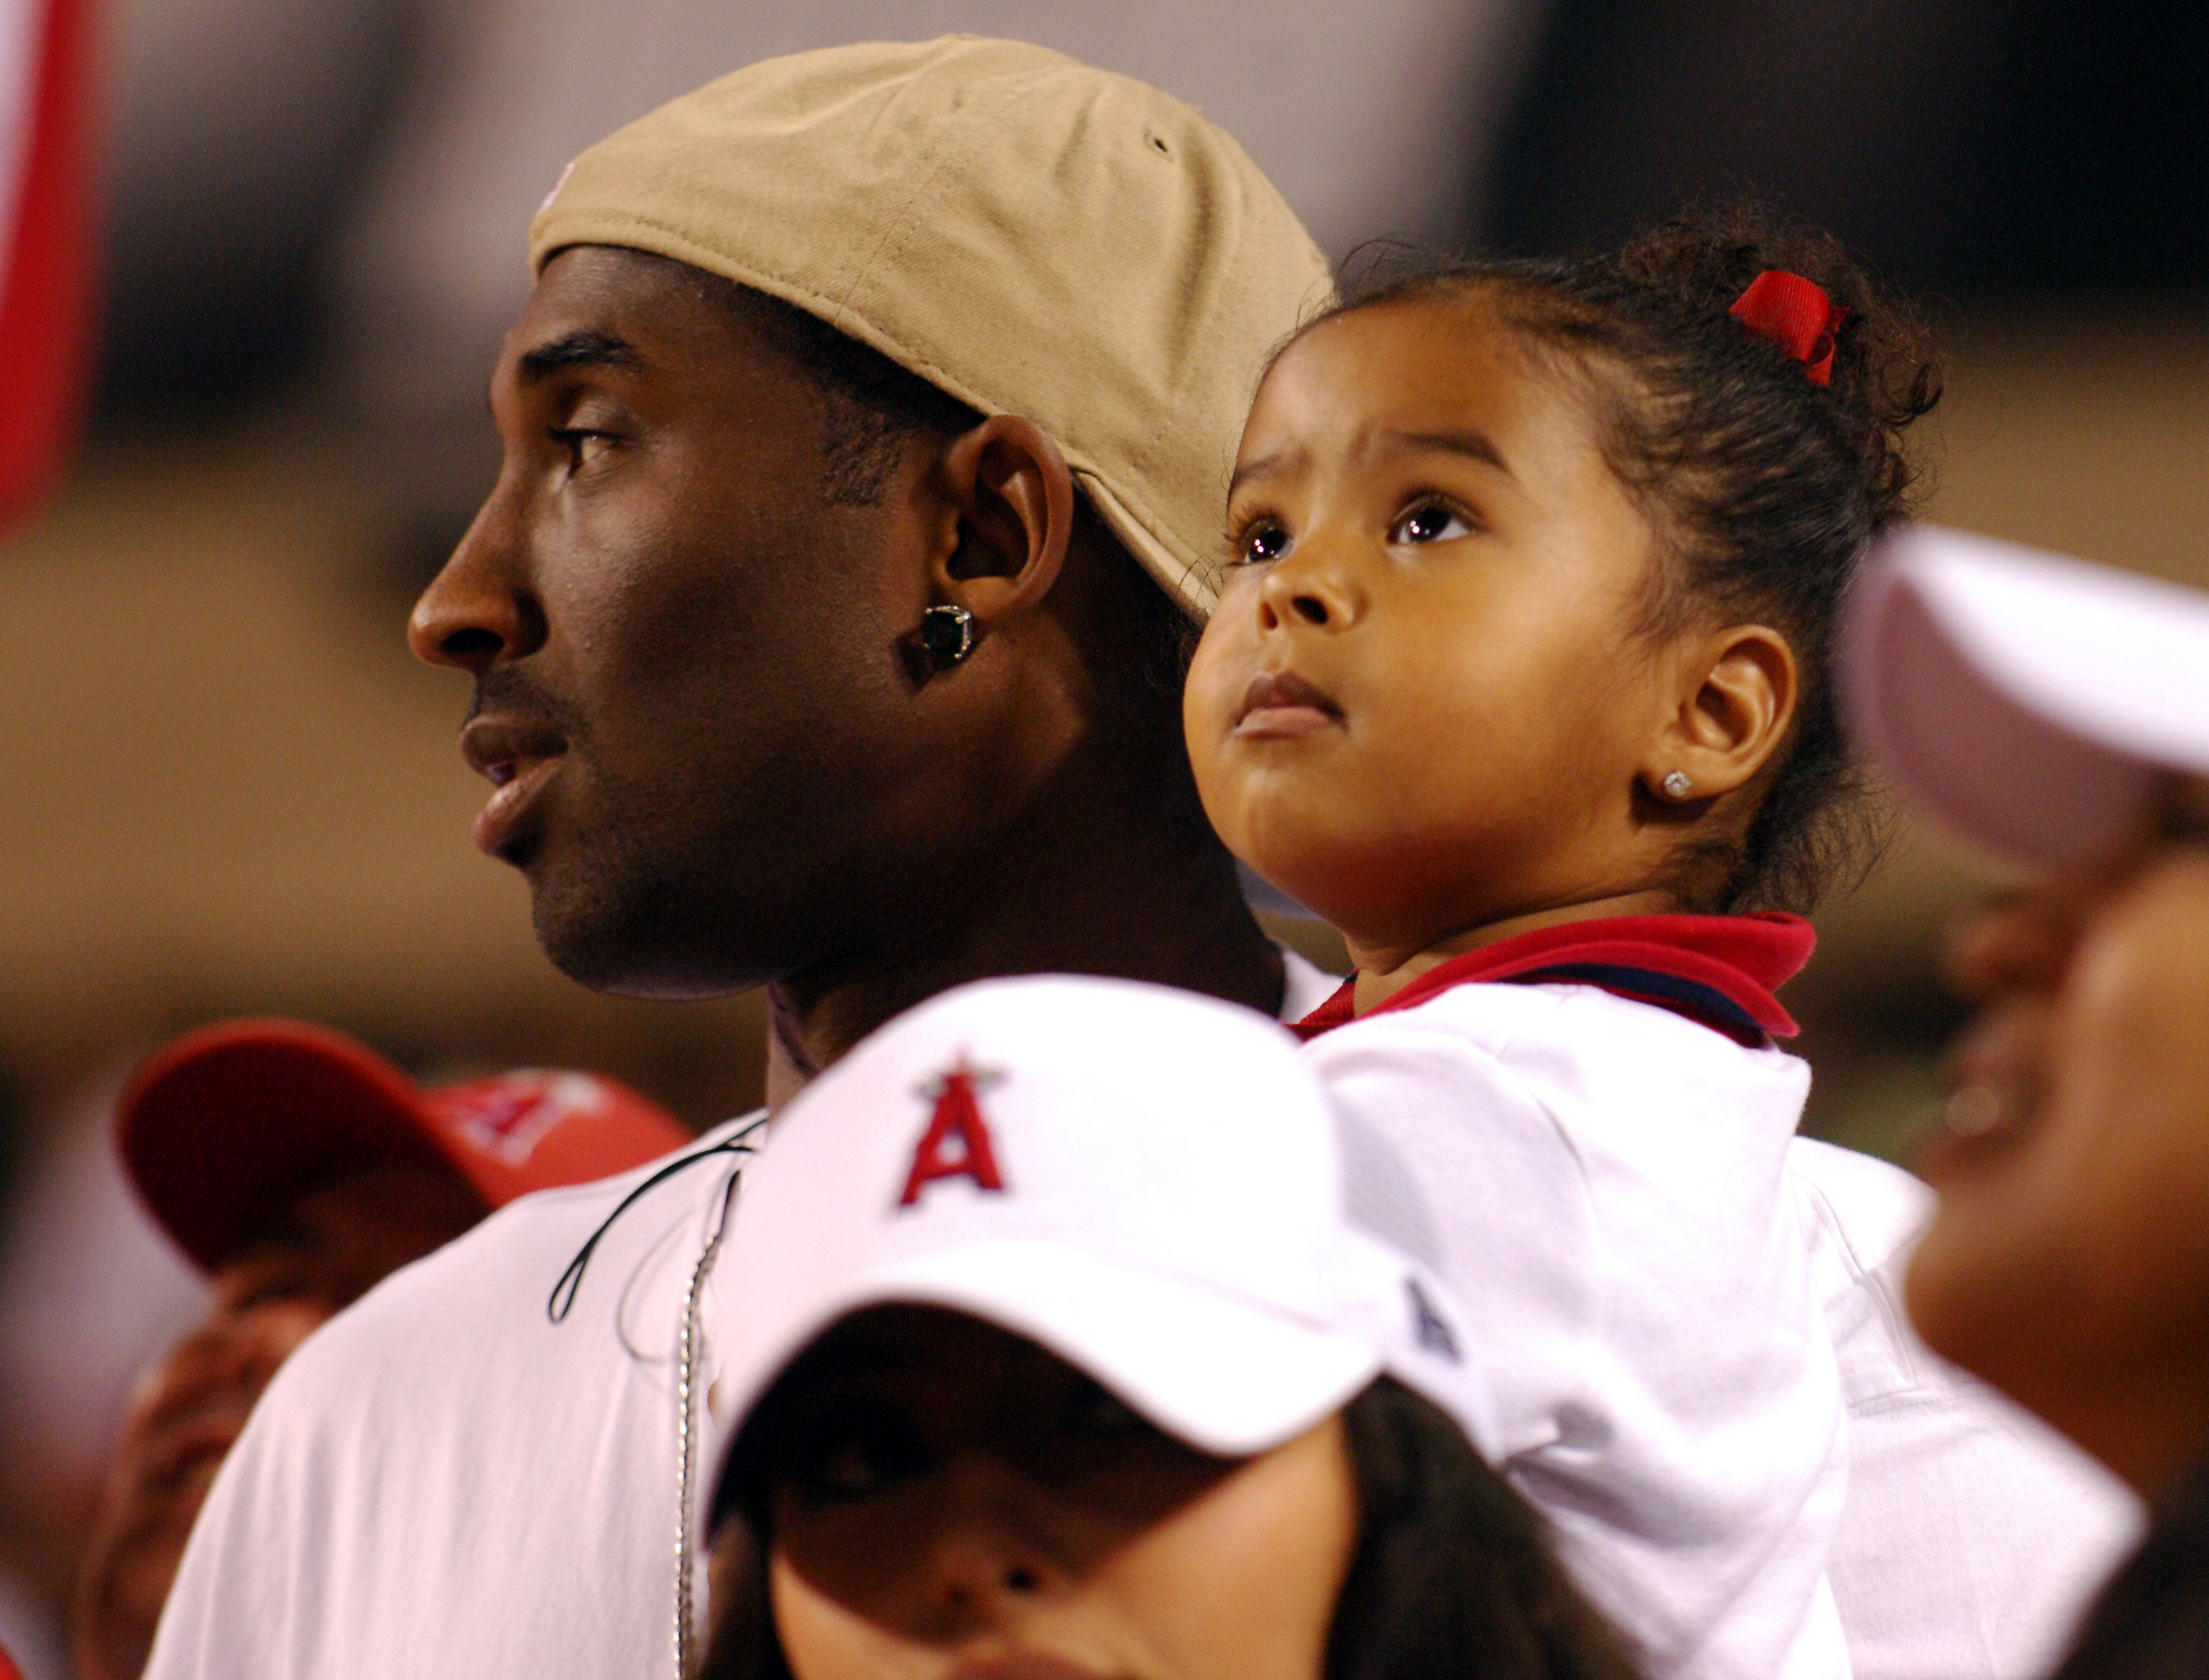 Kobe Bryant and Natalia Diamante Bryant at the Los Angeles Angels of Anaheim game against the New York Yankees at Angel Stadium in Anaheim, Calif. on Saturday, July 23, 2005. | Source: Getty Images